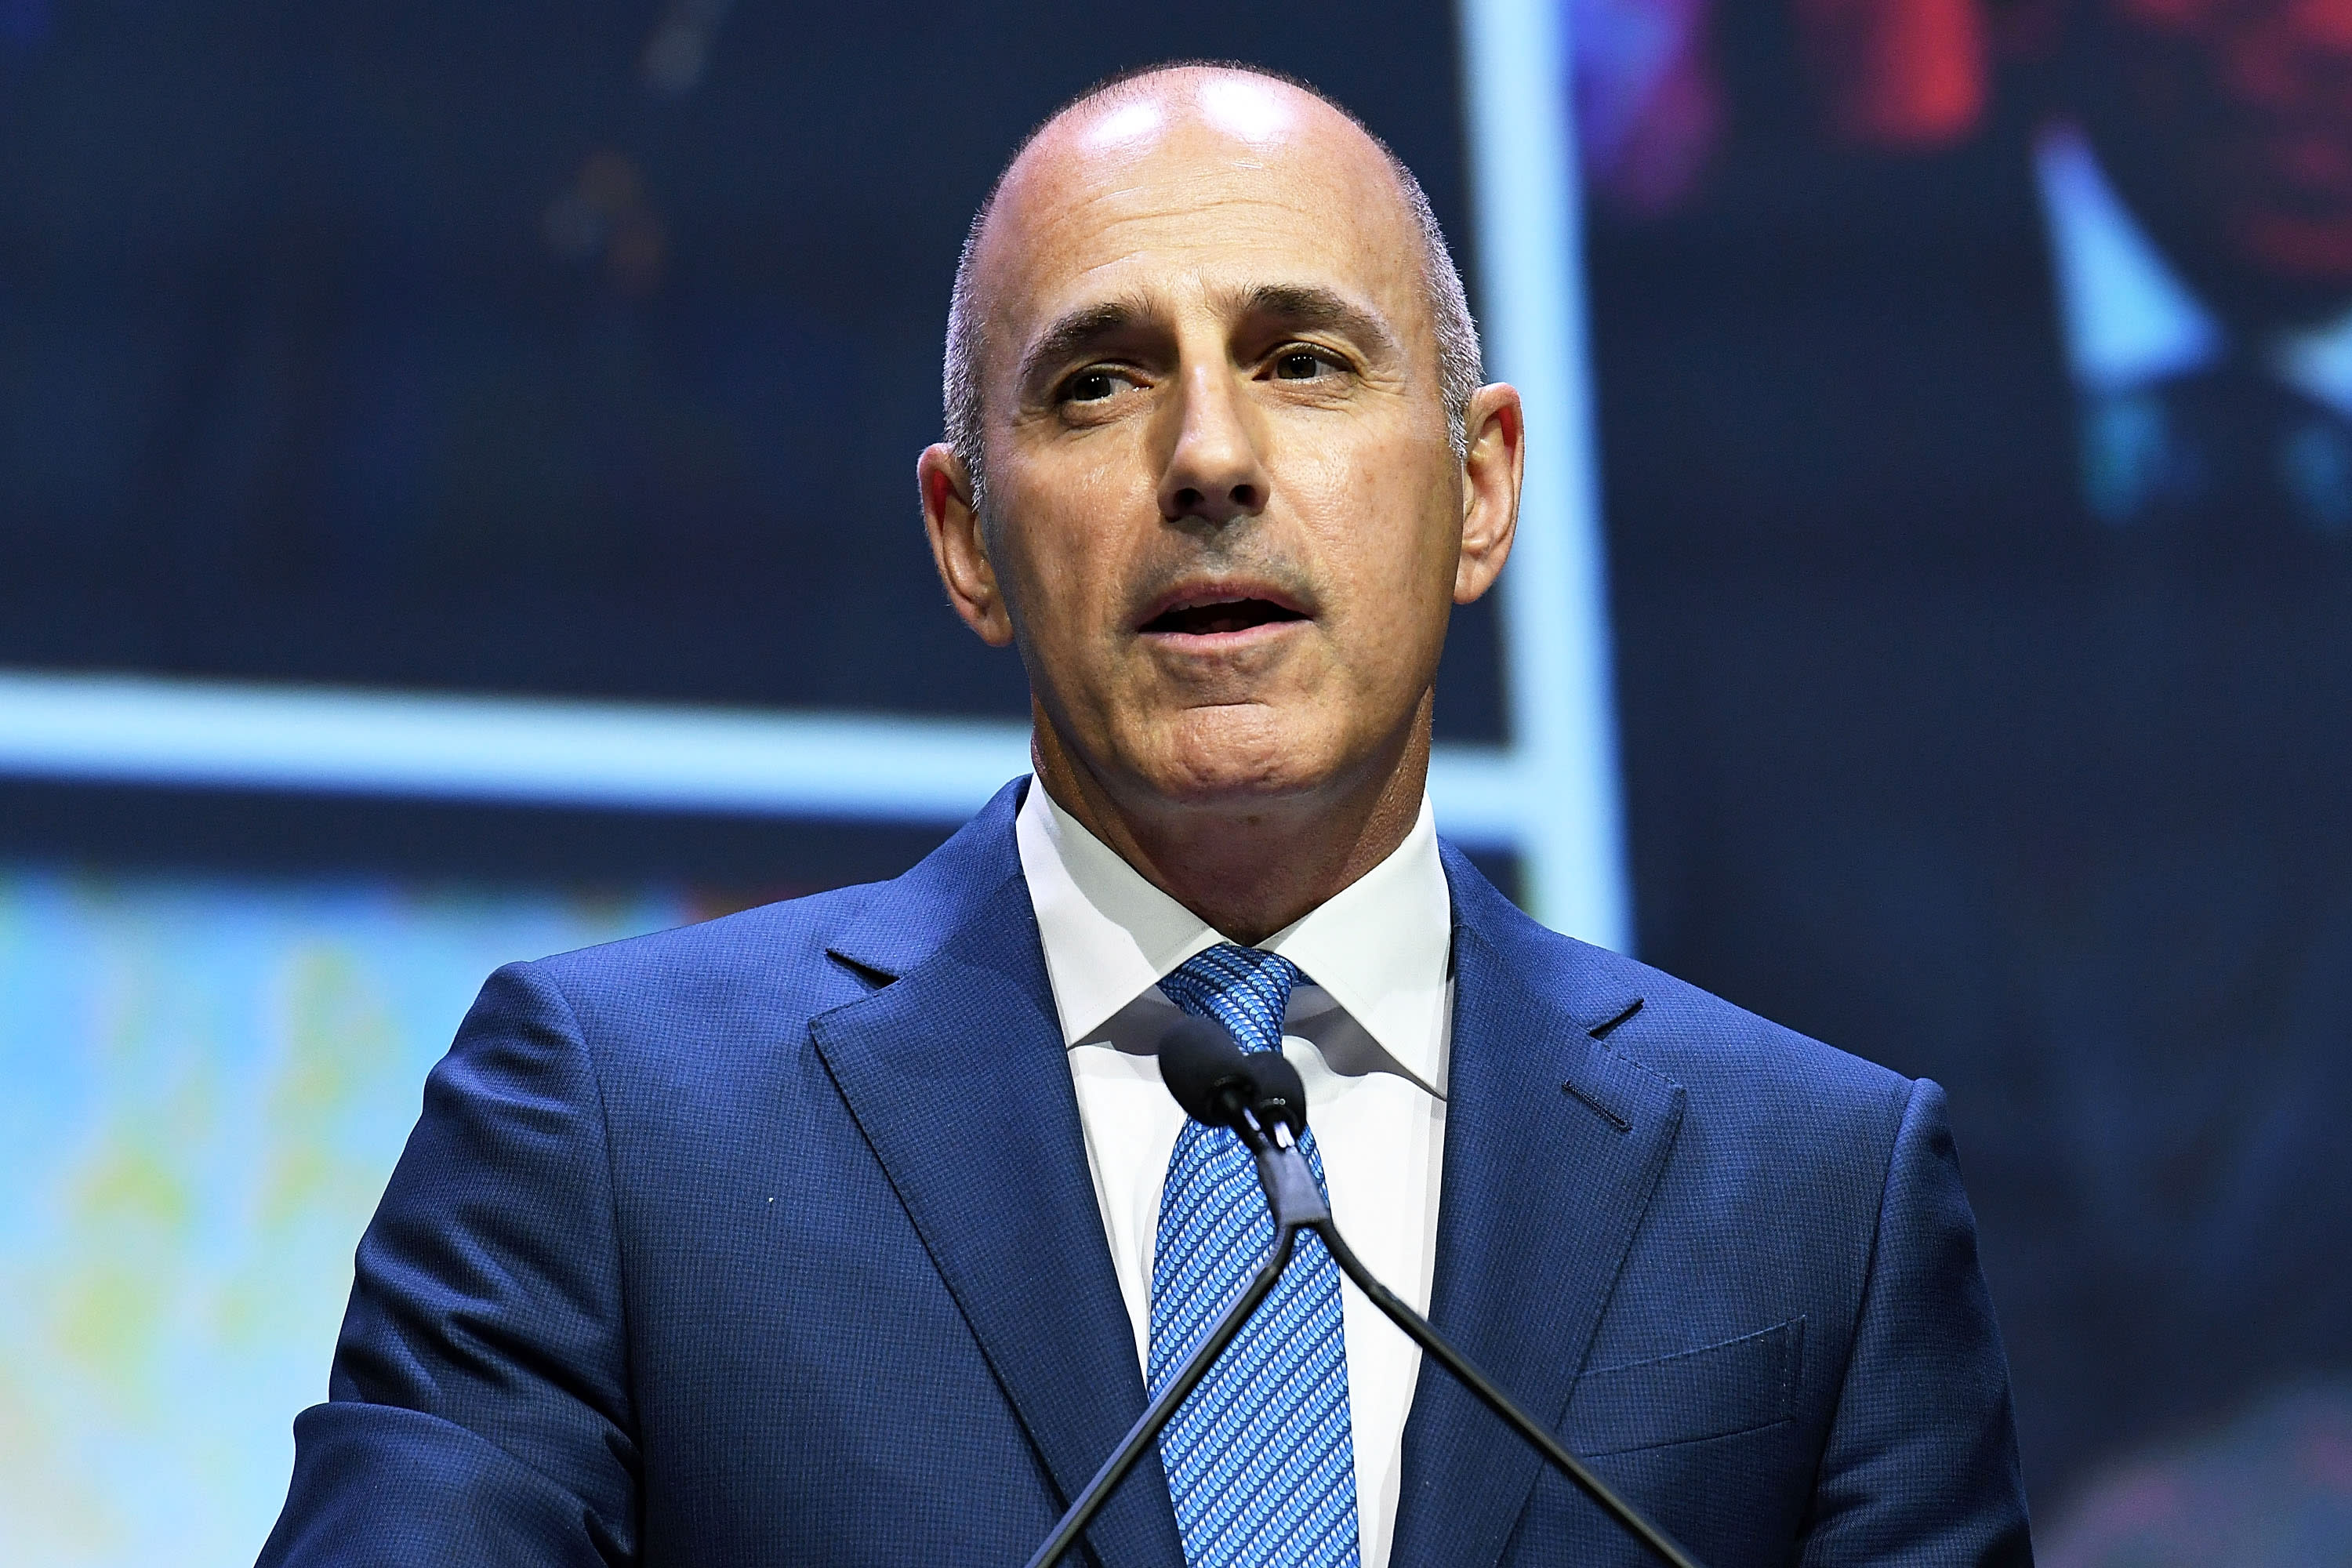 Does Matt Lauer look different to you?